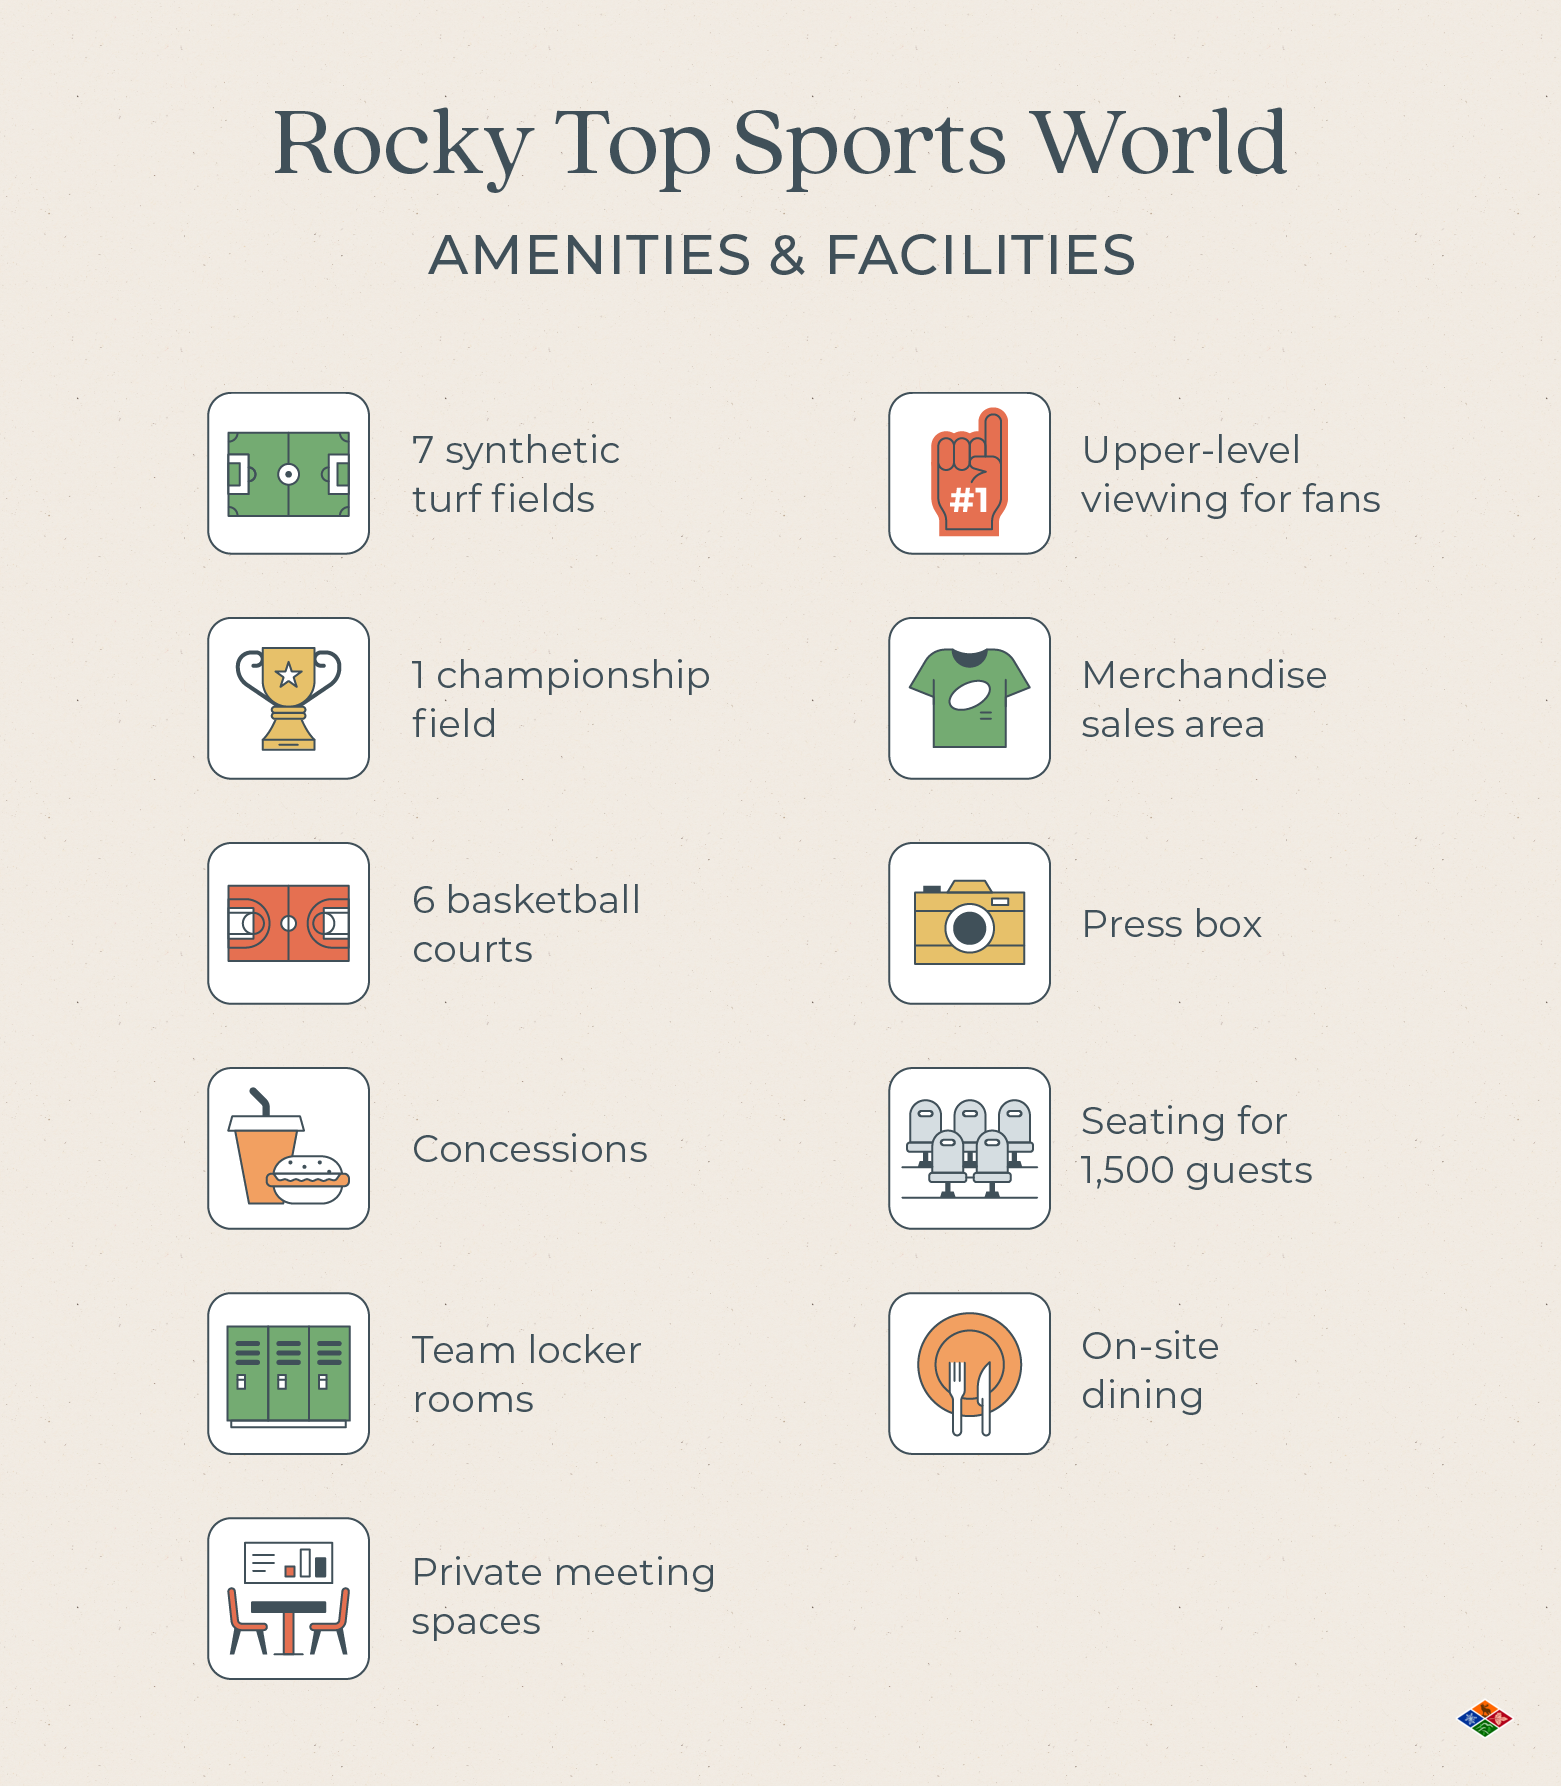 Rocky Top Sports World amenities and facilities summary image including fields, courts, locker rooms, concessions, seating, seating, and private meeting rooms